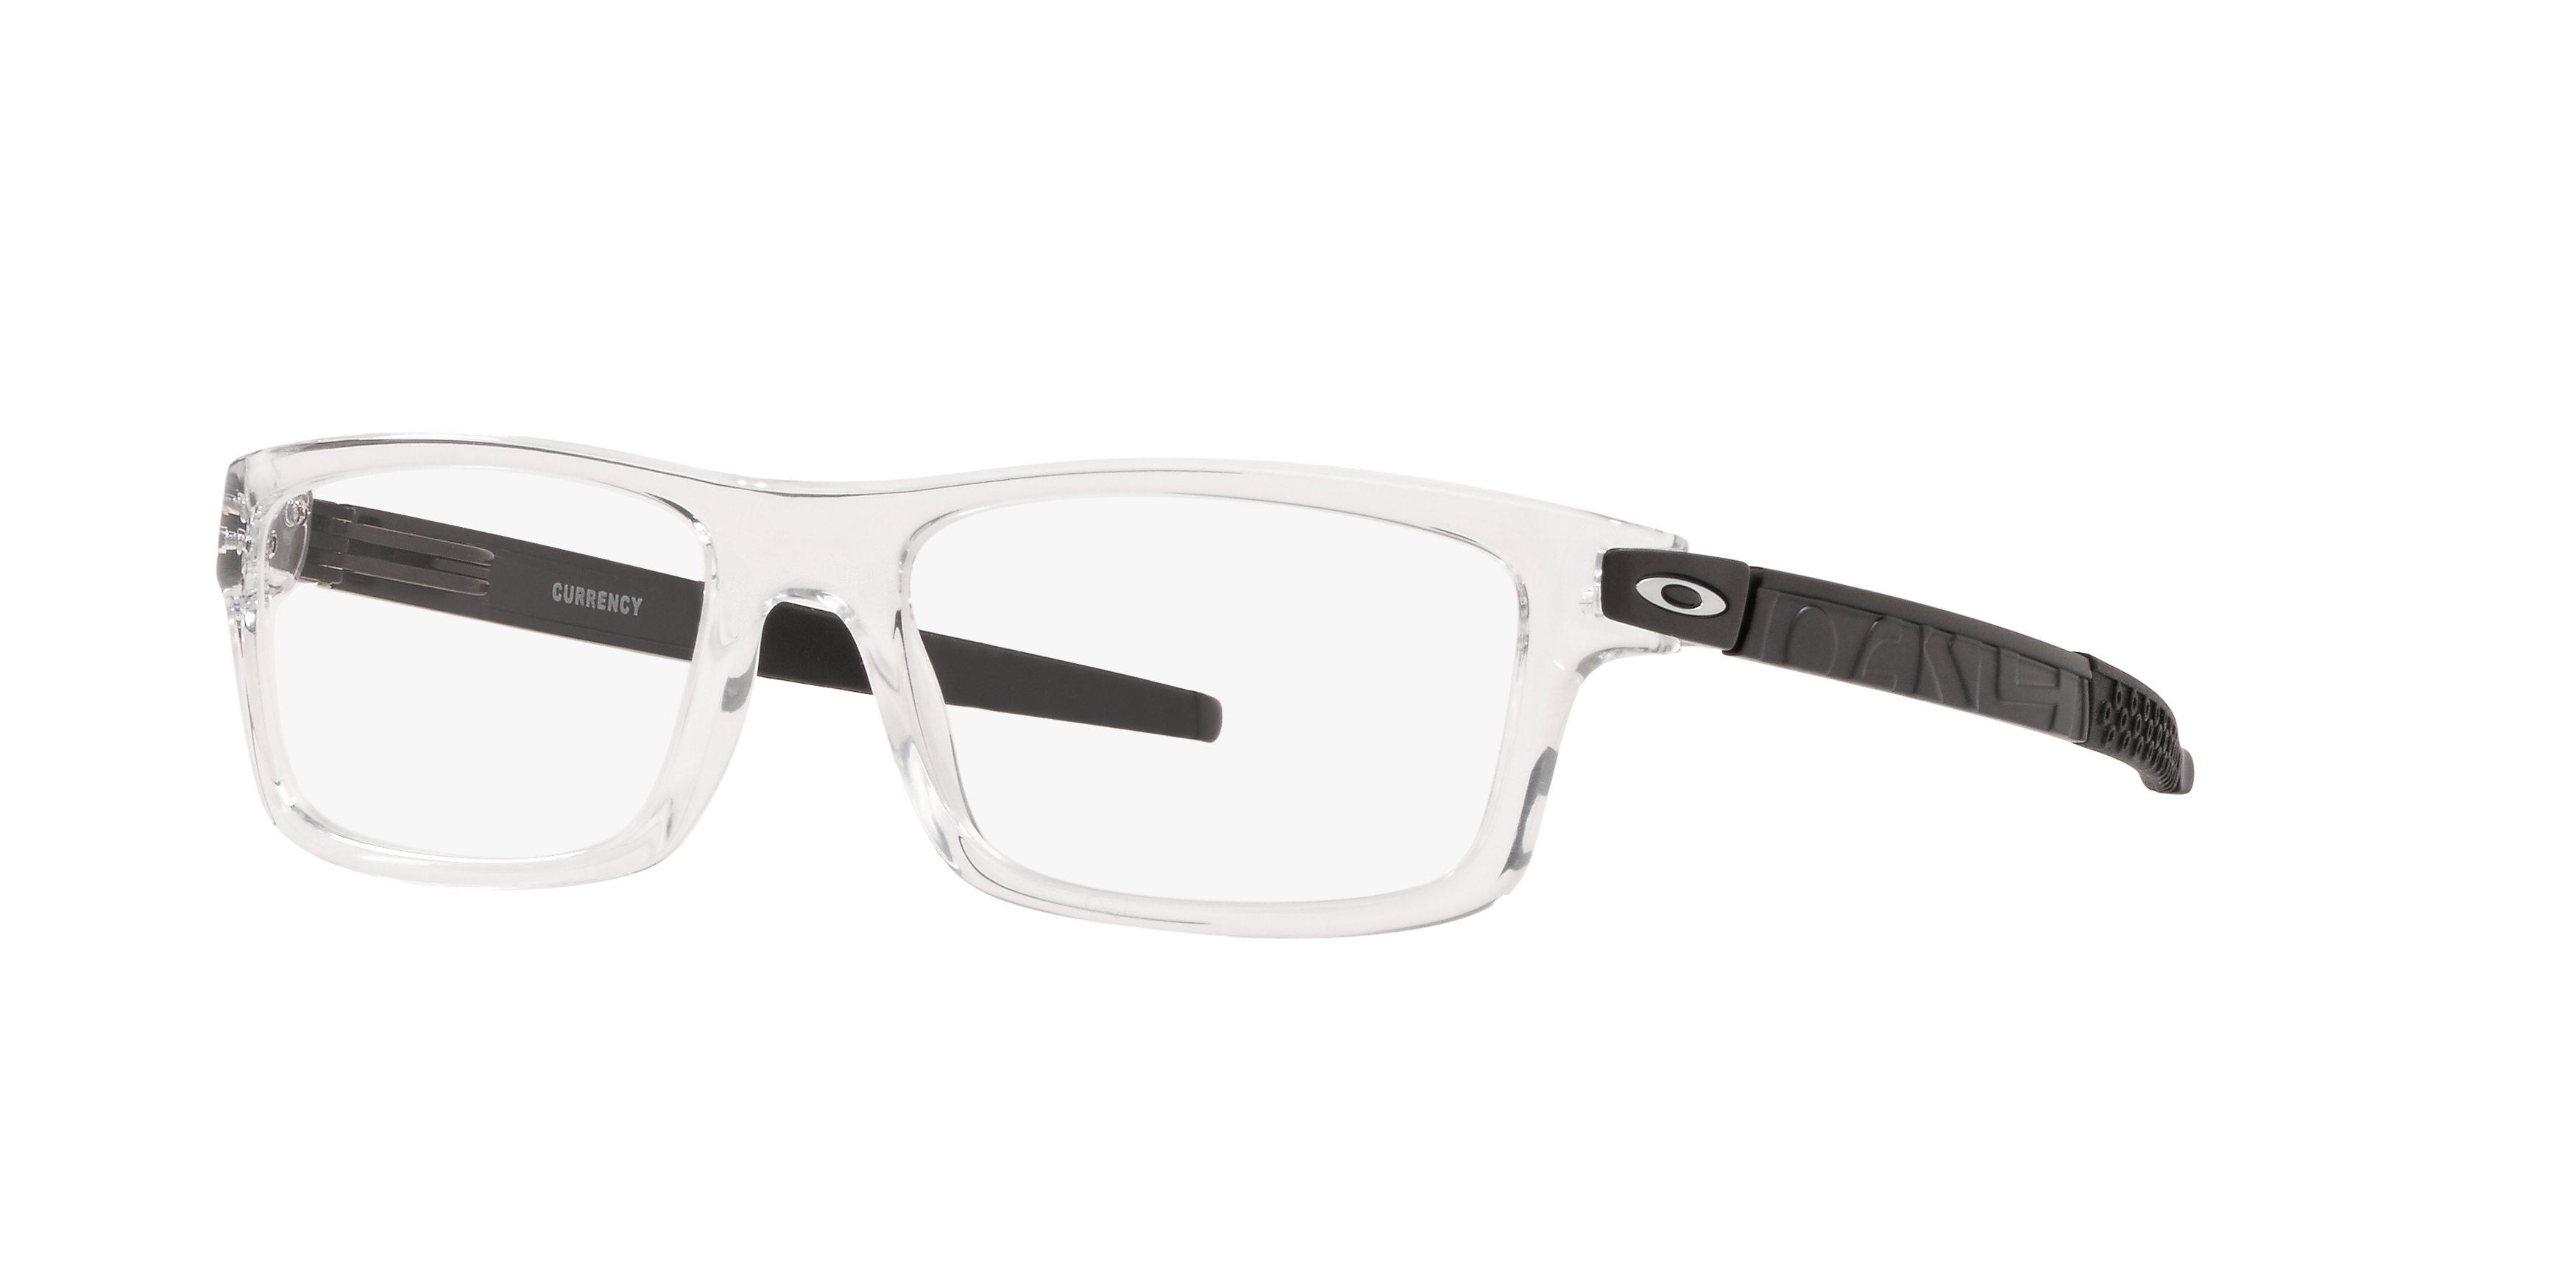 Angle_Left01 Oakley Currency OX 8026 Glasses Transparent / Black